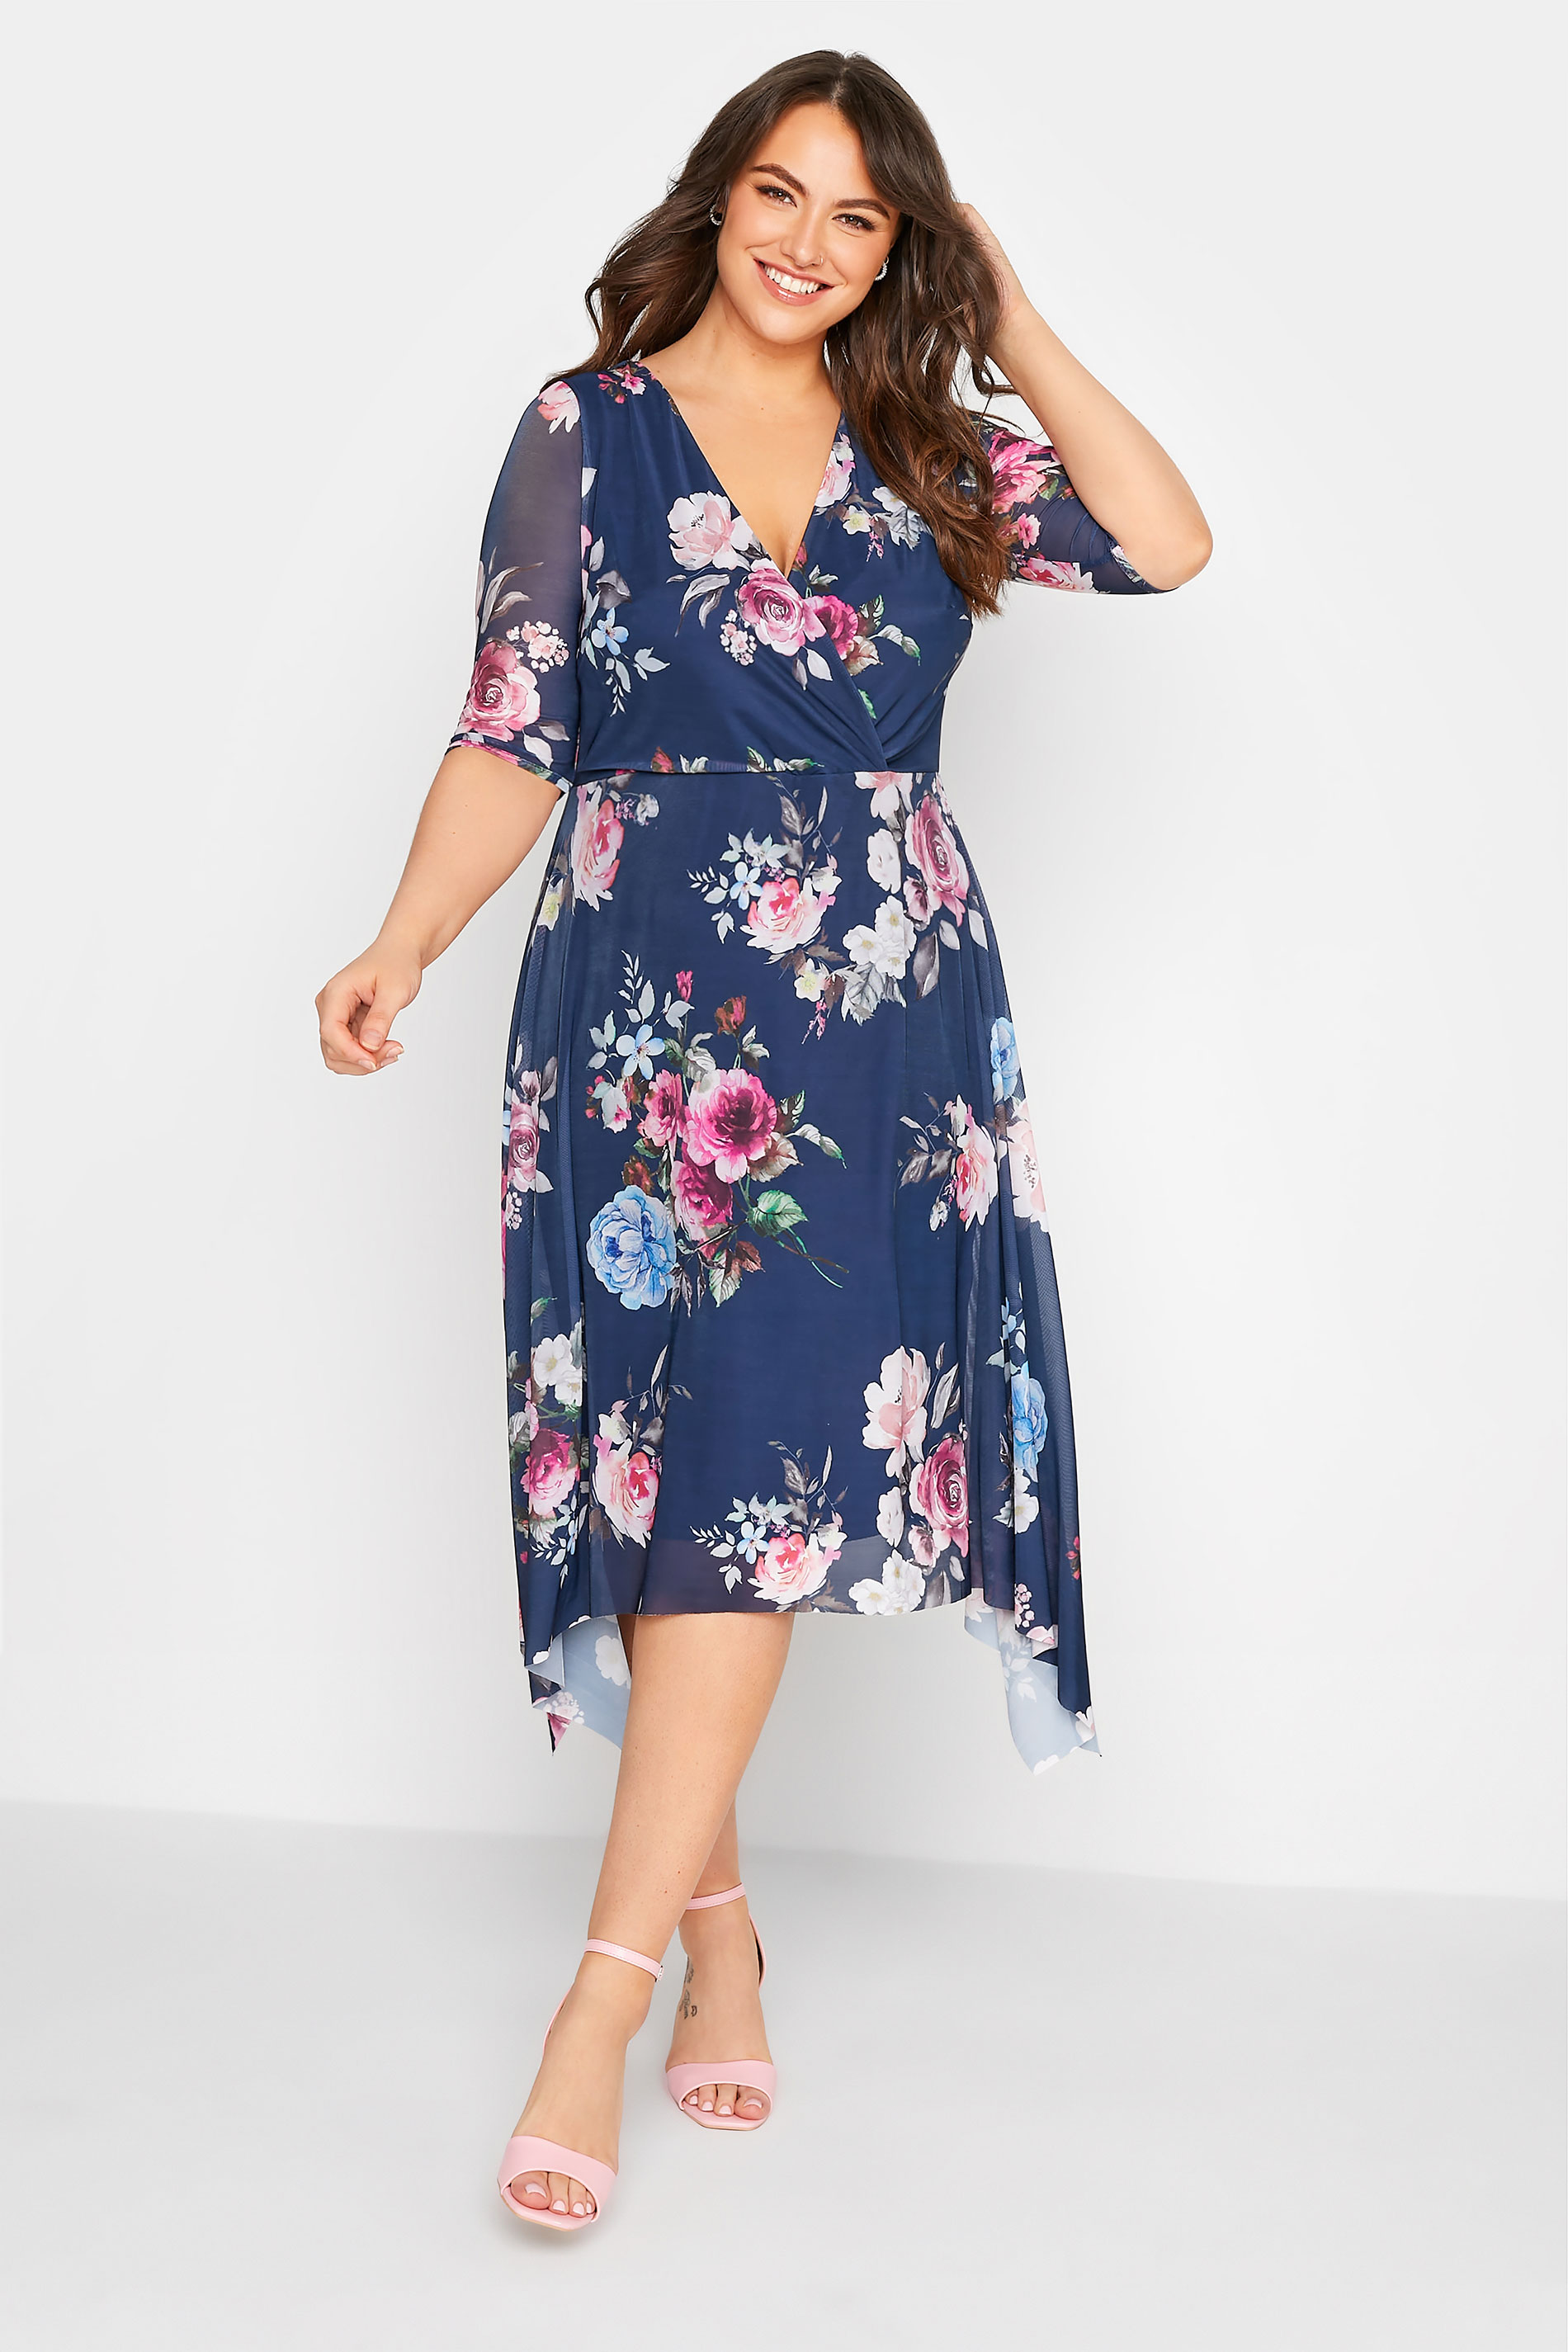 Robes Grande Taille Grande taille  Robes Portefeuilles | YOURS LONDON - Robe à Fleurs Bleue Marine Cache-Coeur - NH13706